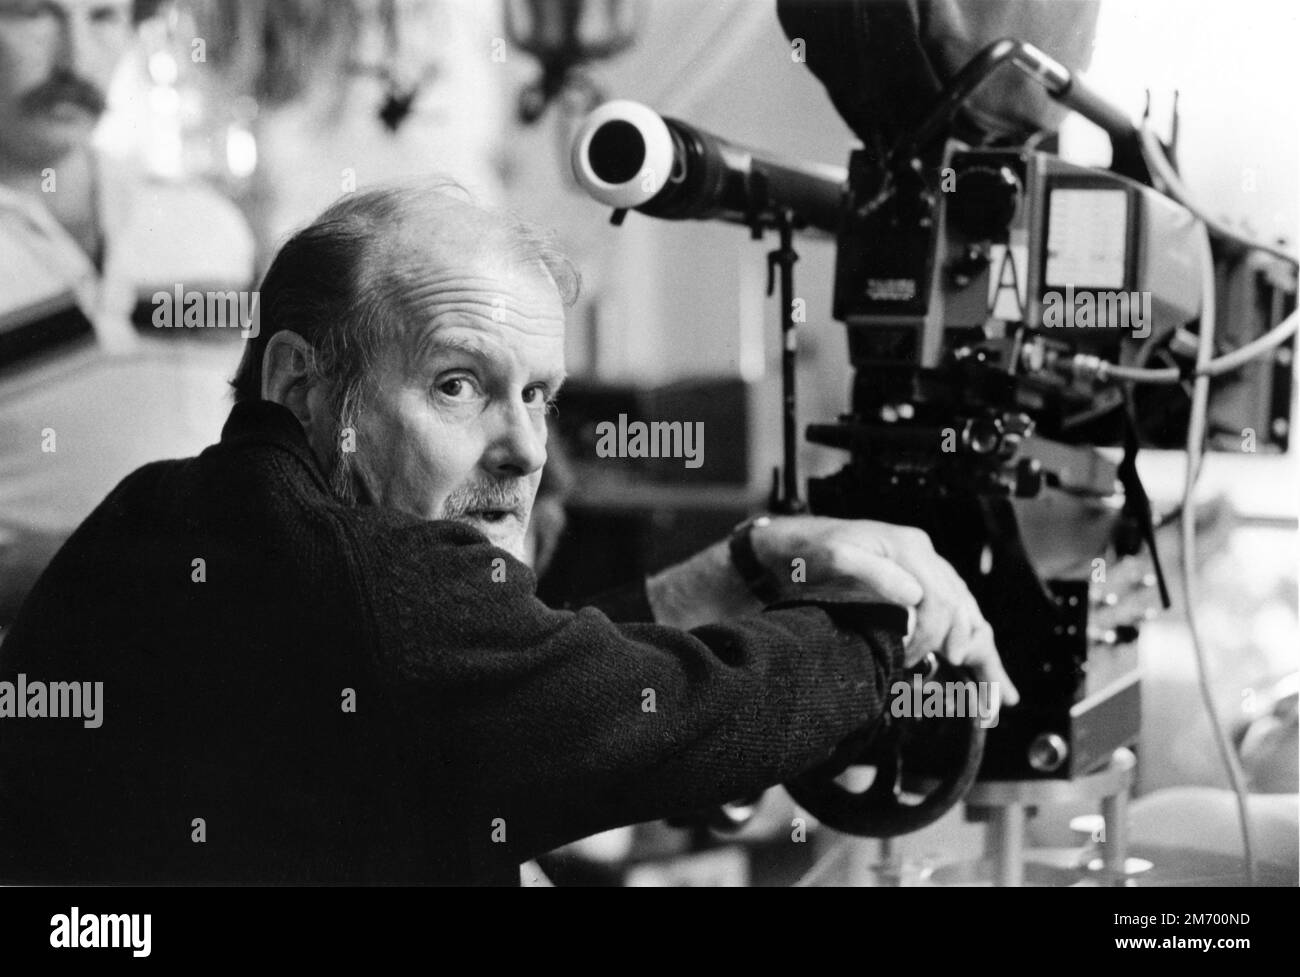 Director BOB FOSSE on set candid portrait next to Movie Camera during filming of STAR 80 (1983) director / writer BOB FOSSE from article Death of a Playmate by Teresa Carpenter cinematographer Sven Nykvist The Ladd Company / Warner Bros. Stock Photo